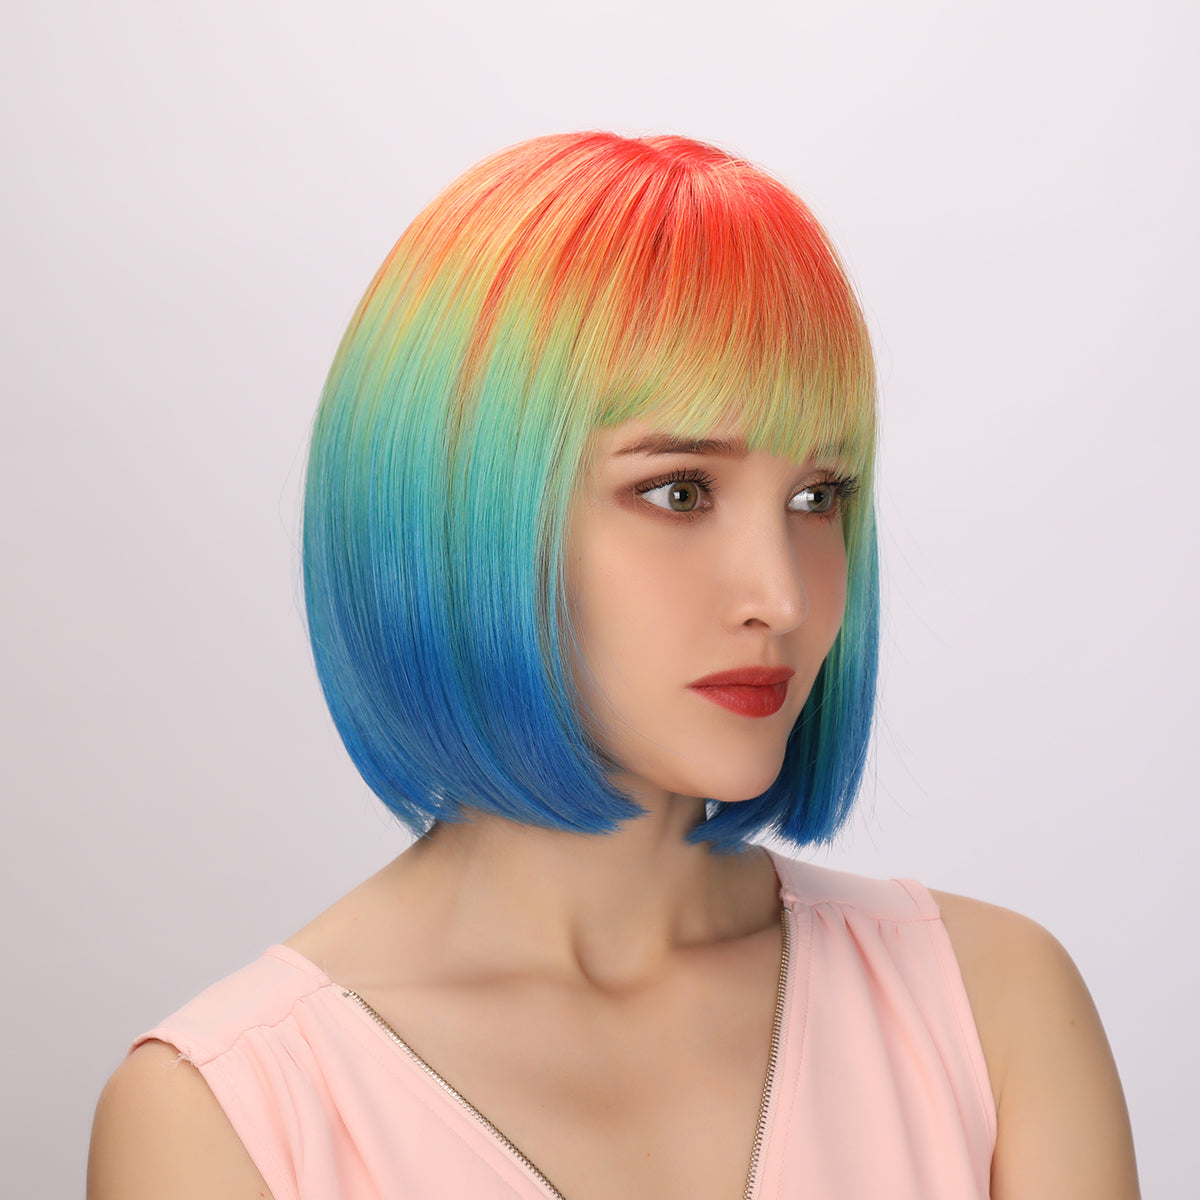 12 Inches | Colorful | Costume | Sraight Hair